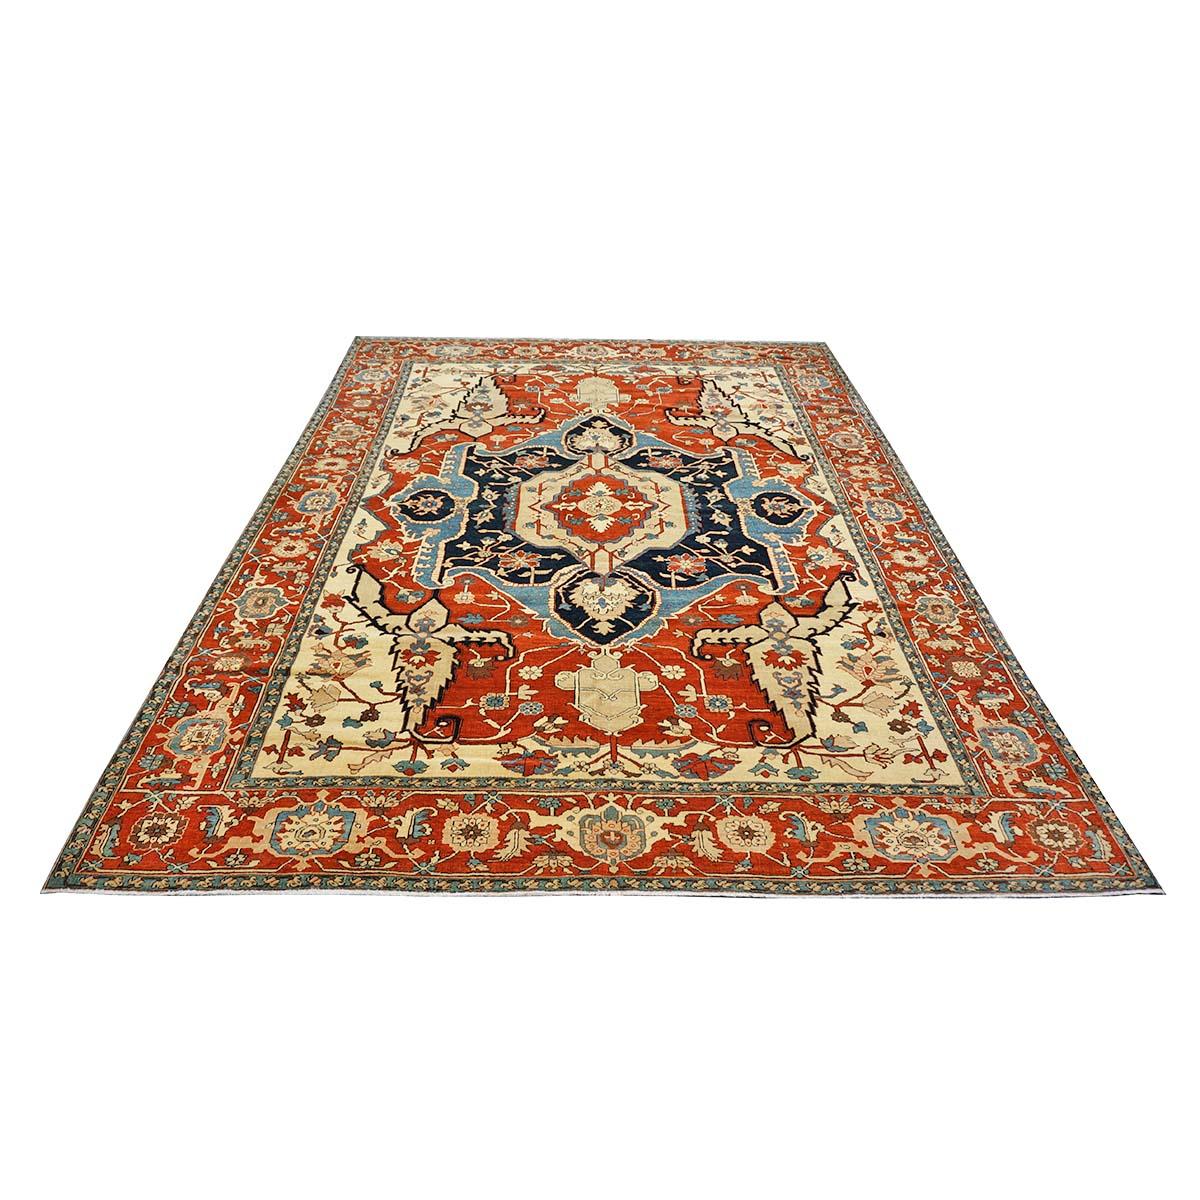  Ashly Fine Rugs presents a new antique reproduction Persian Serapi 8x11 handmade area rug. Persian Serapi rugs are amongst the most desired rugs by connoisseurs, collectors, and interior designers. Made with all vegetable-dyed, handspun wool and